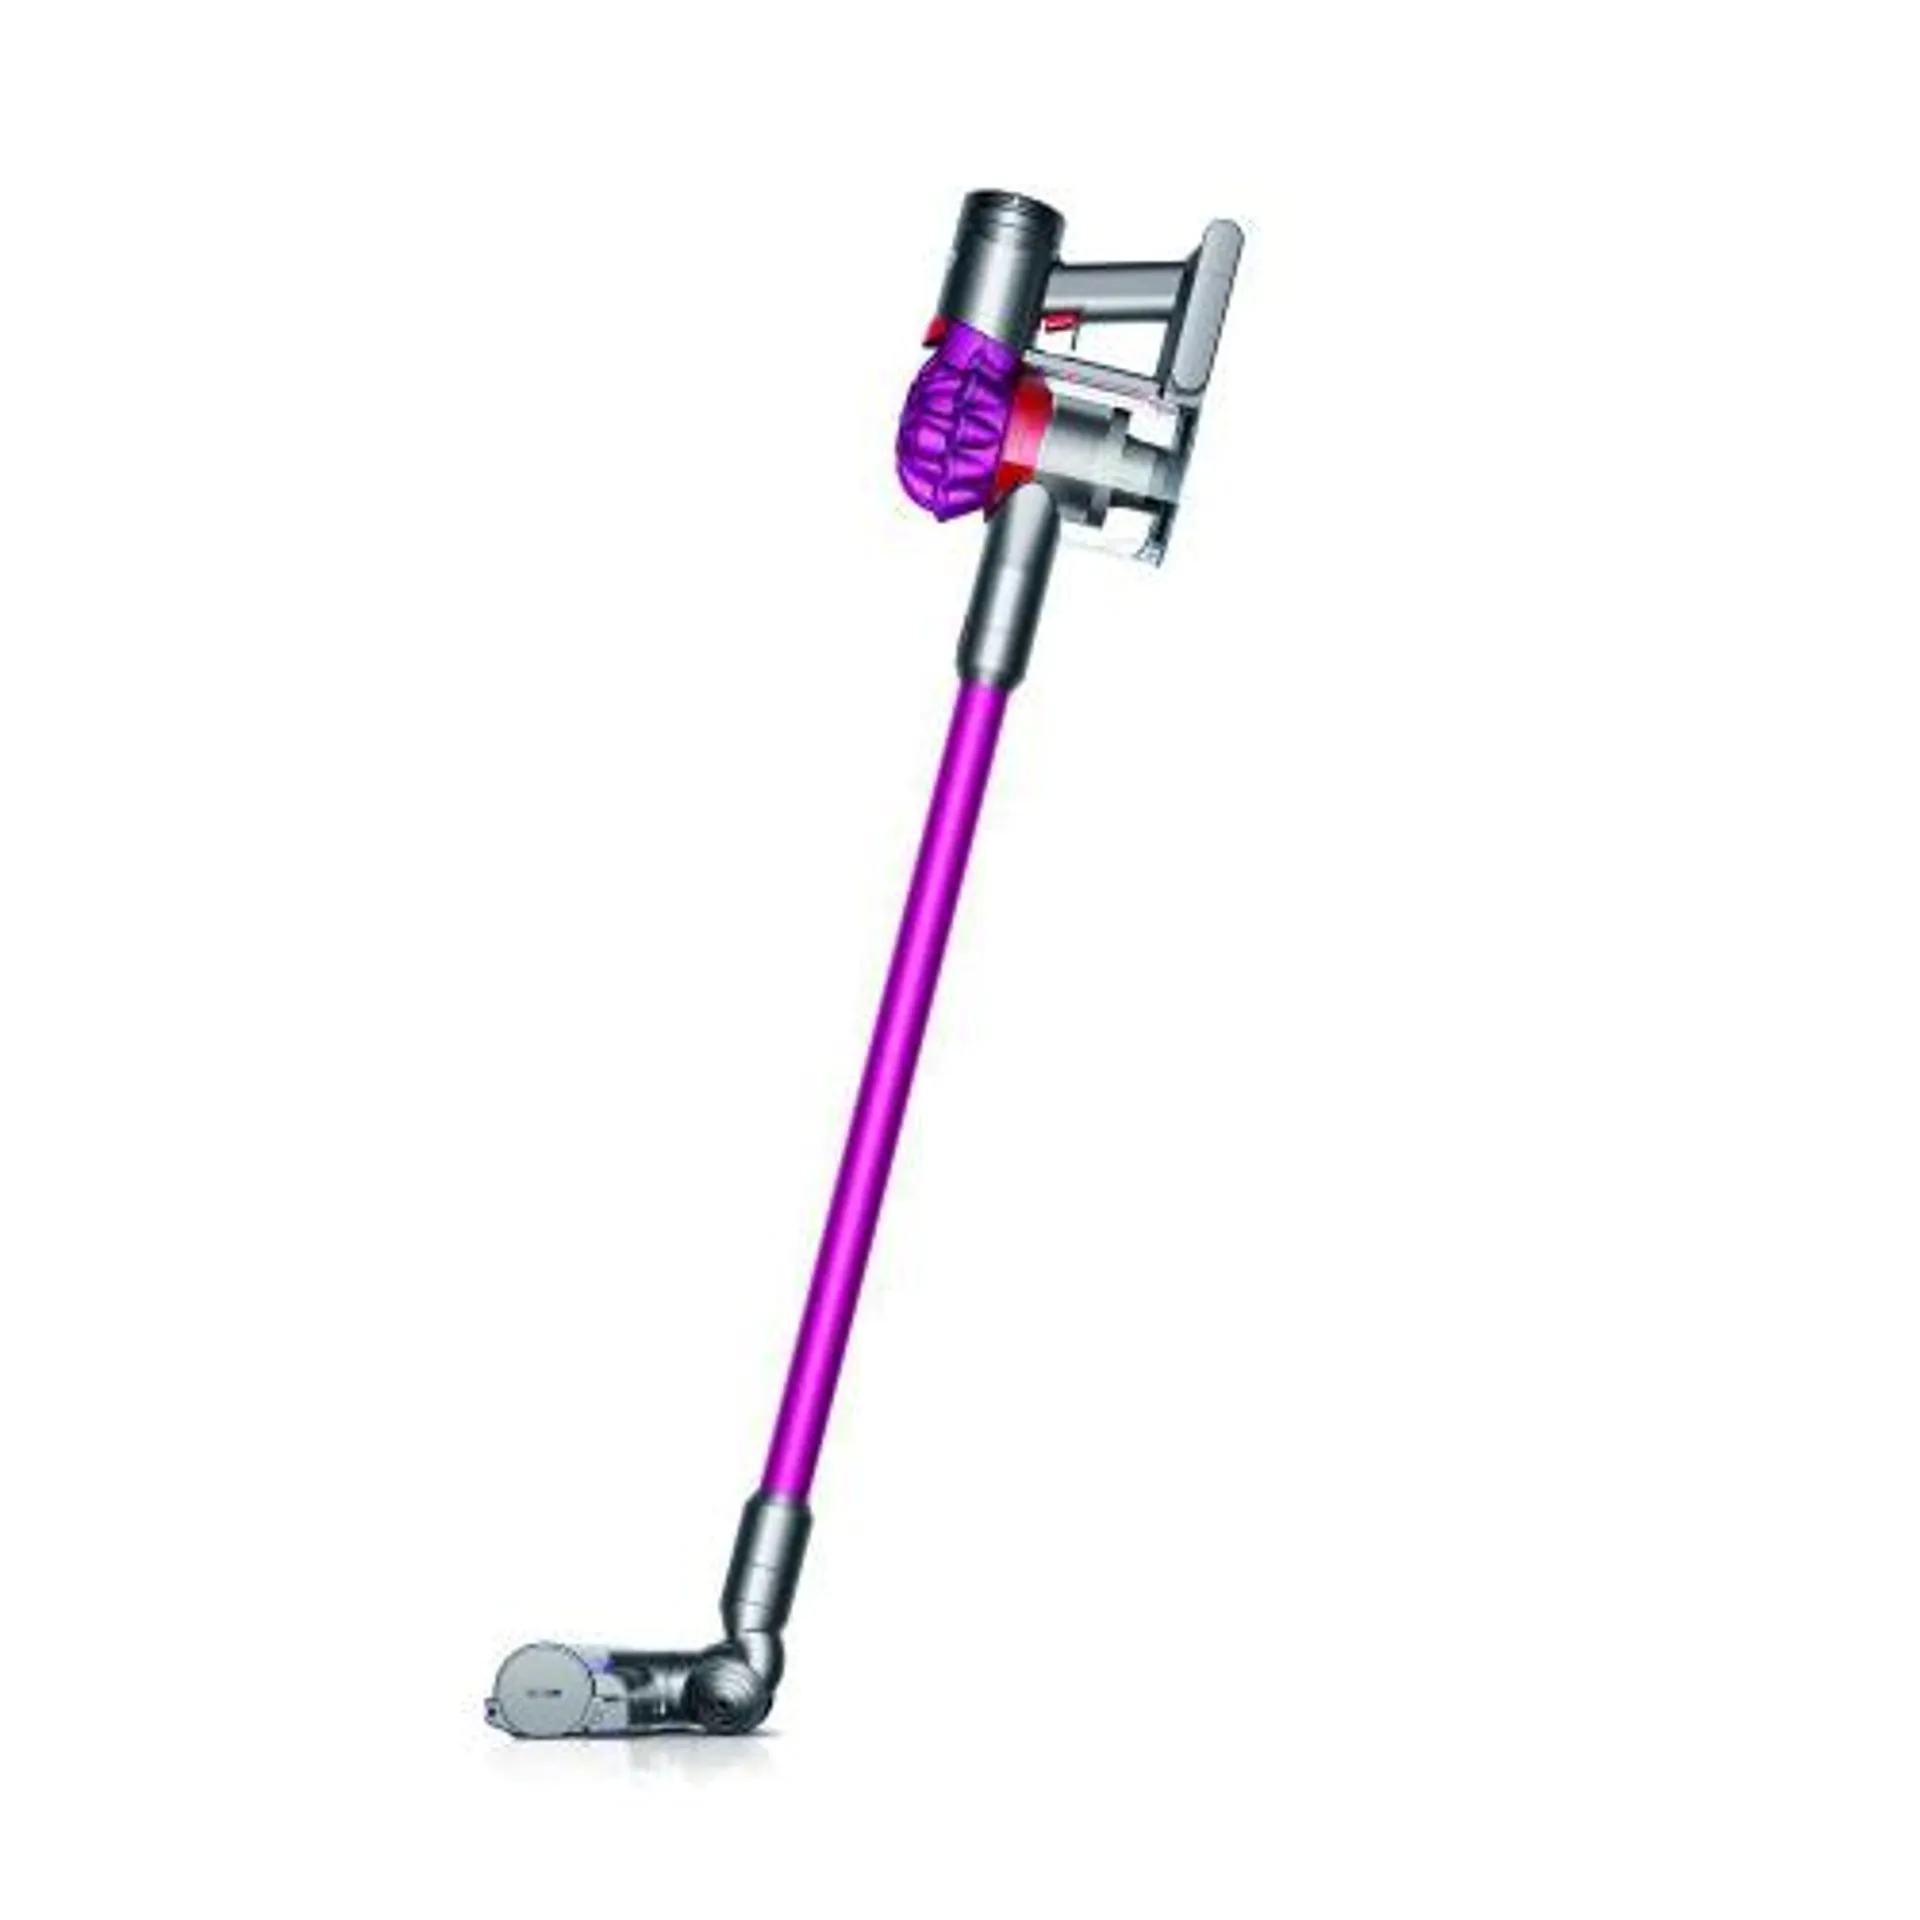 Refurbished (Excellent) - Dyson Official Outlet - V7B Cordless Vacuum - Colour may vary (1 Year Dyson Warranty)